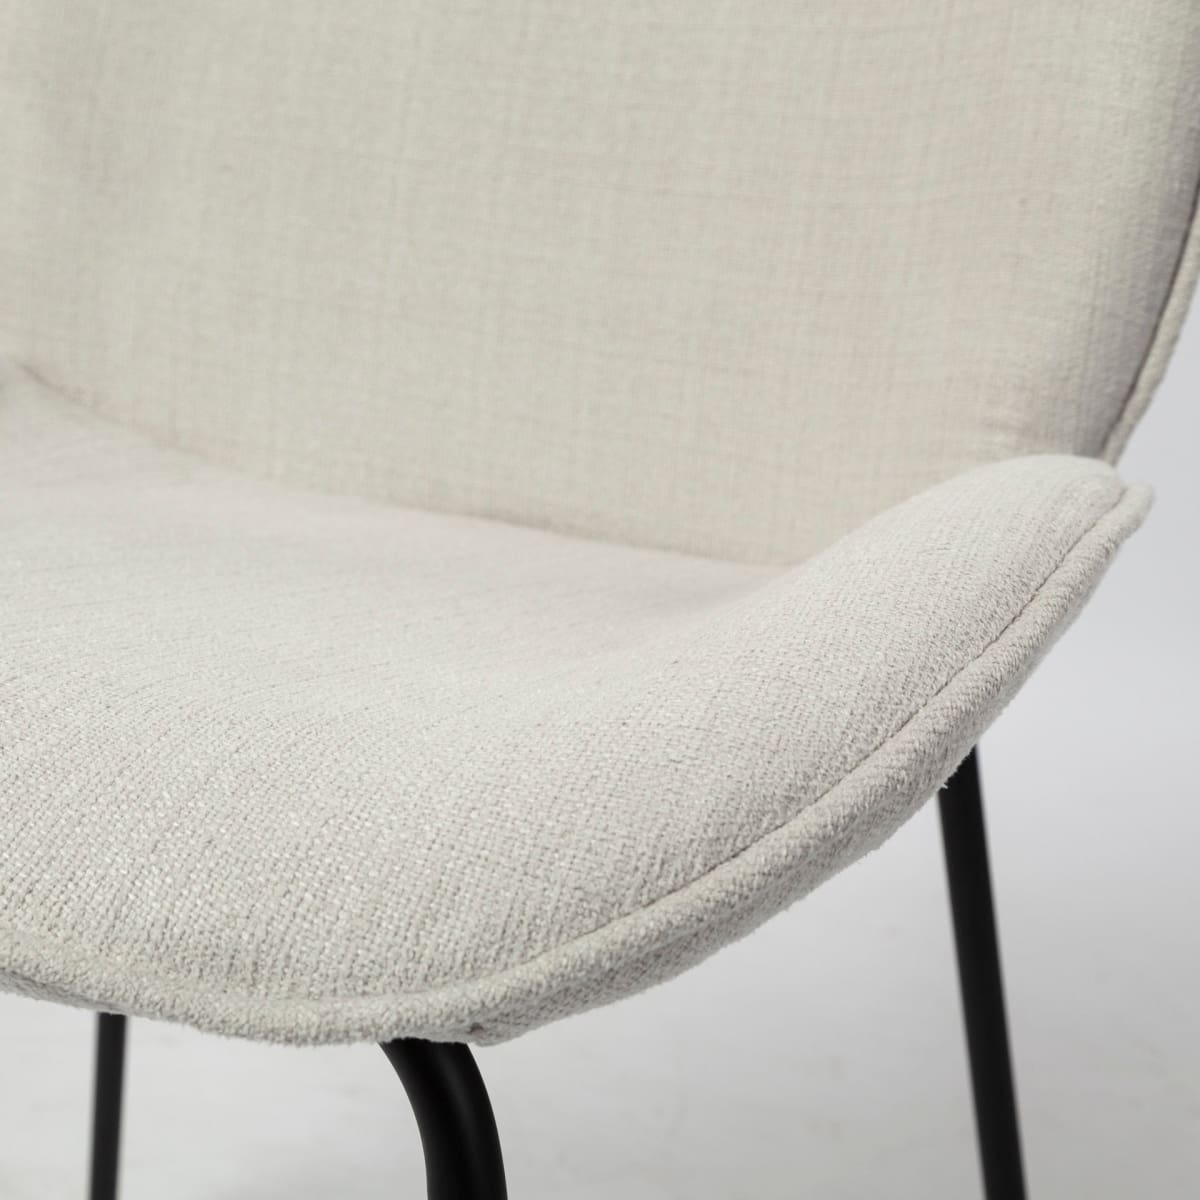 Inala Dining Chair White Fabric | Black Metal - dining-chairs